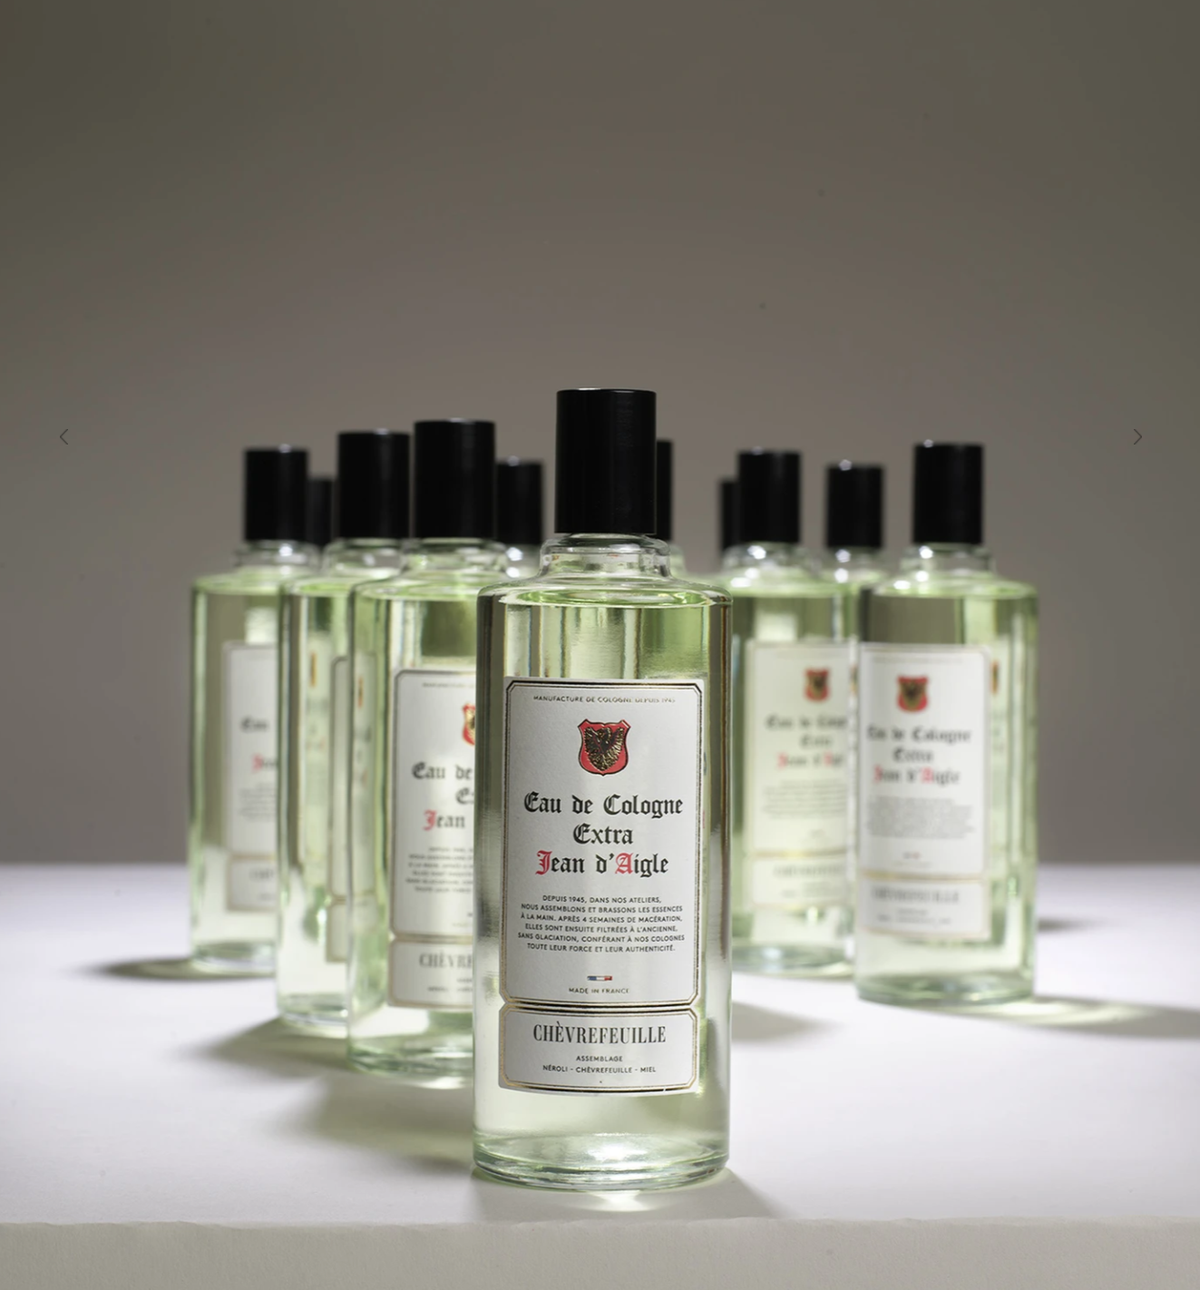 A collection of glass bottles filled with Jean d'Aigle Honeysuckle Eau De Cologne, labeled "Jean d'Aigle" with some bottles slightly out of focus in the background, centered on a well.